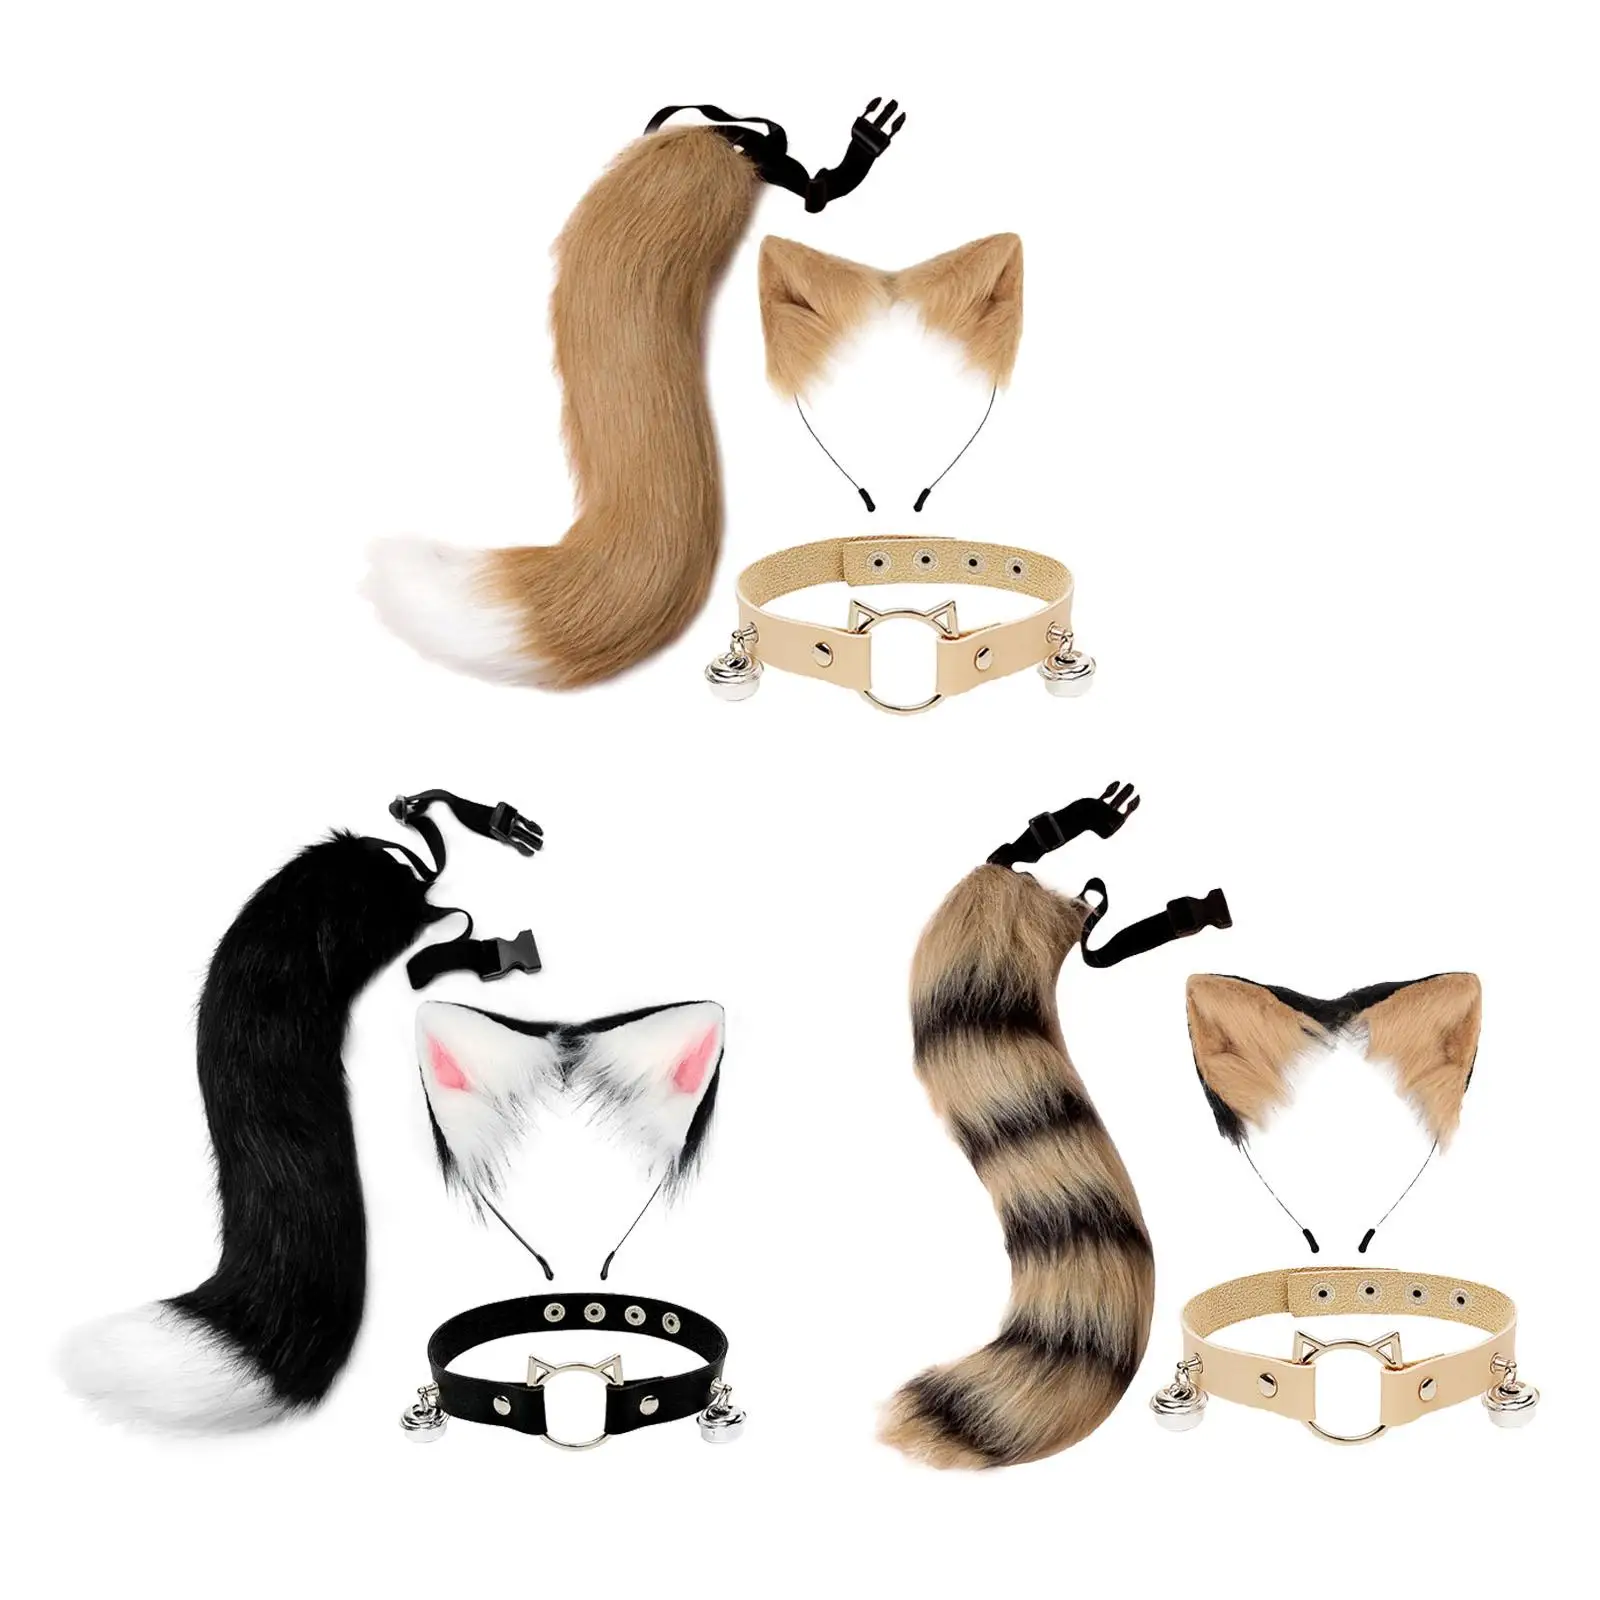 

Plush Faux Fur Cat Ears and Tail Set Costume Fancy Dress Cosplay Decoration for Party Masquerade Role Play Carnival Stage Shows